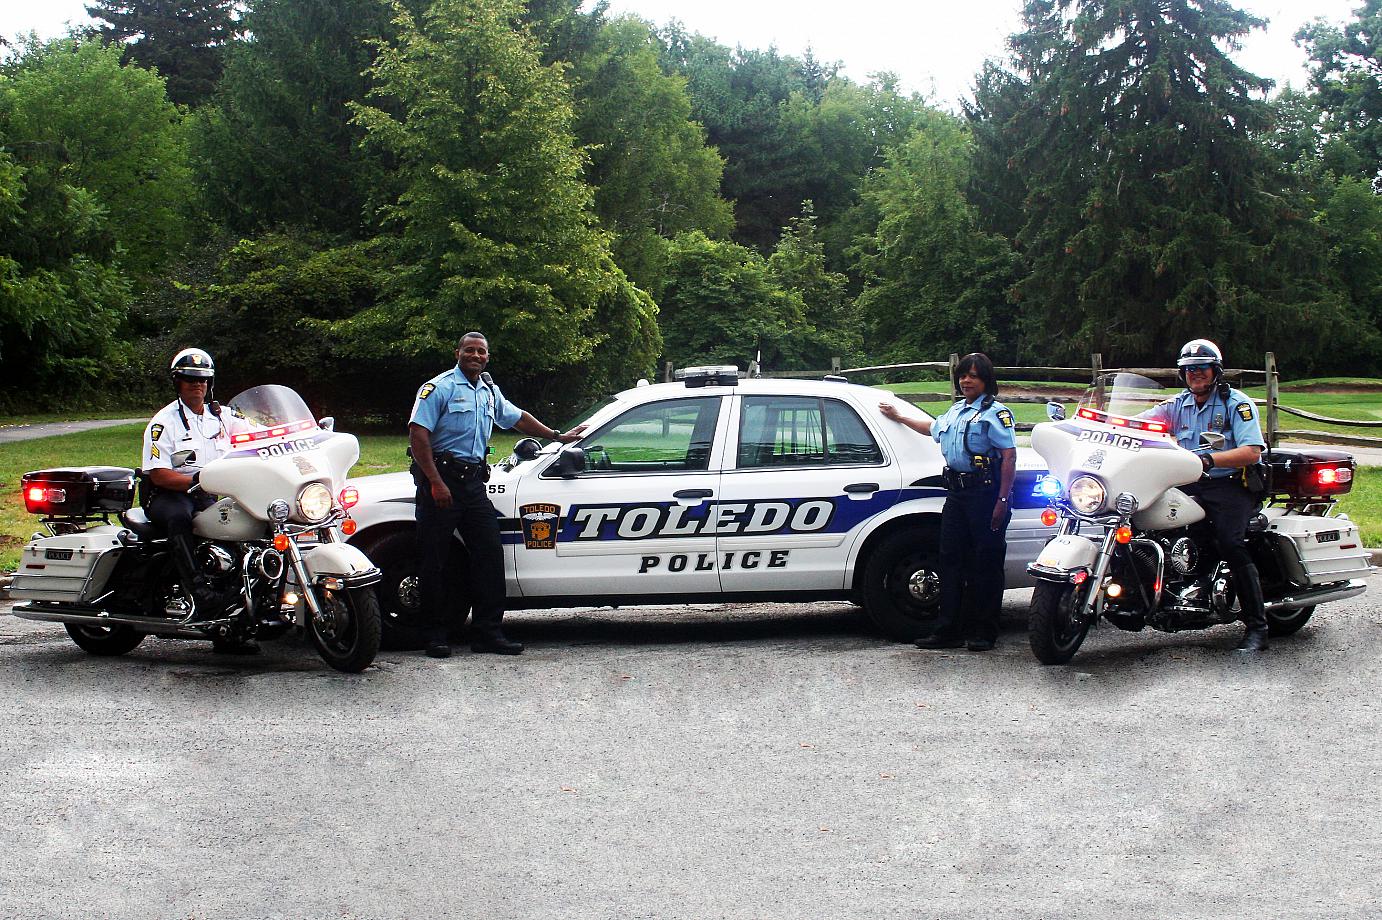 Toledo Police Department officers with vehicles